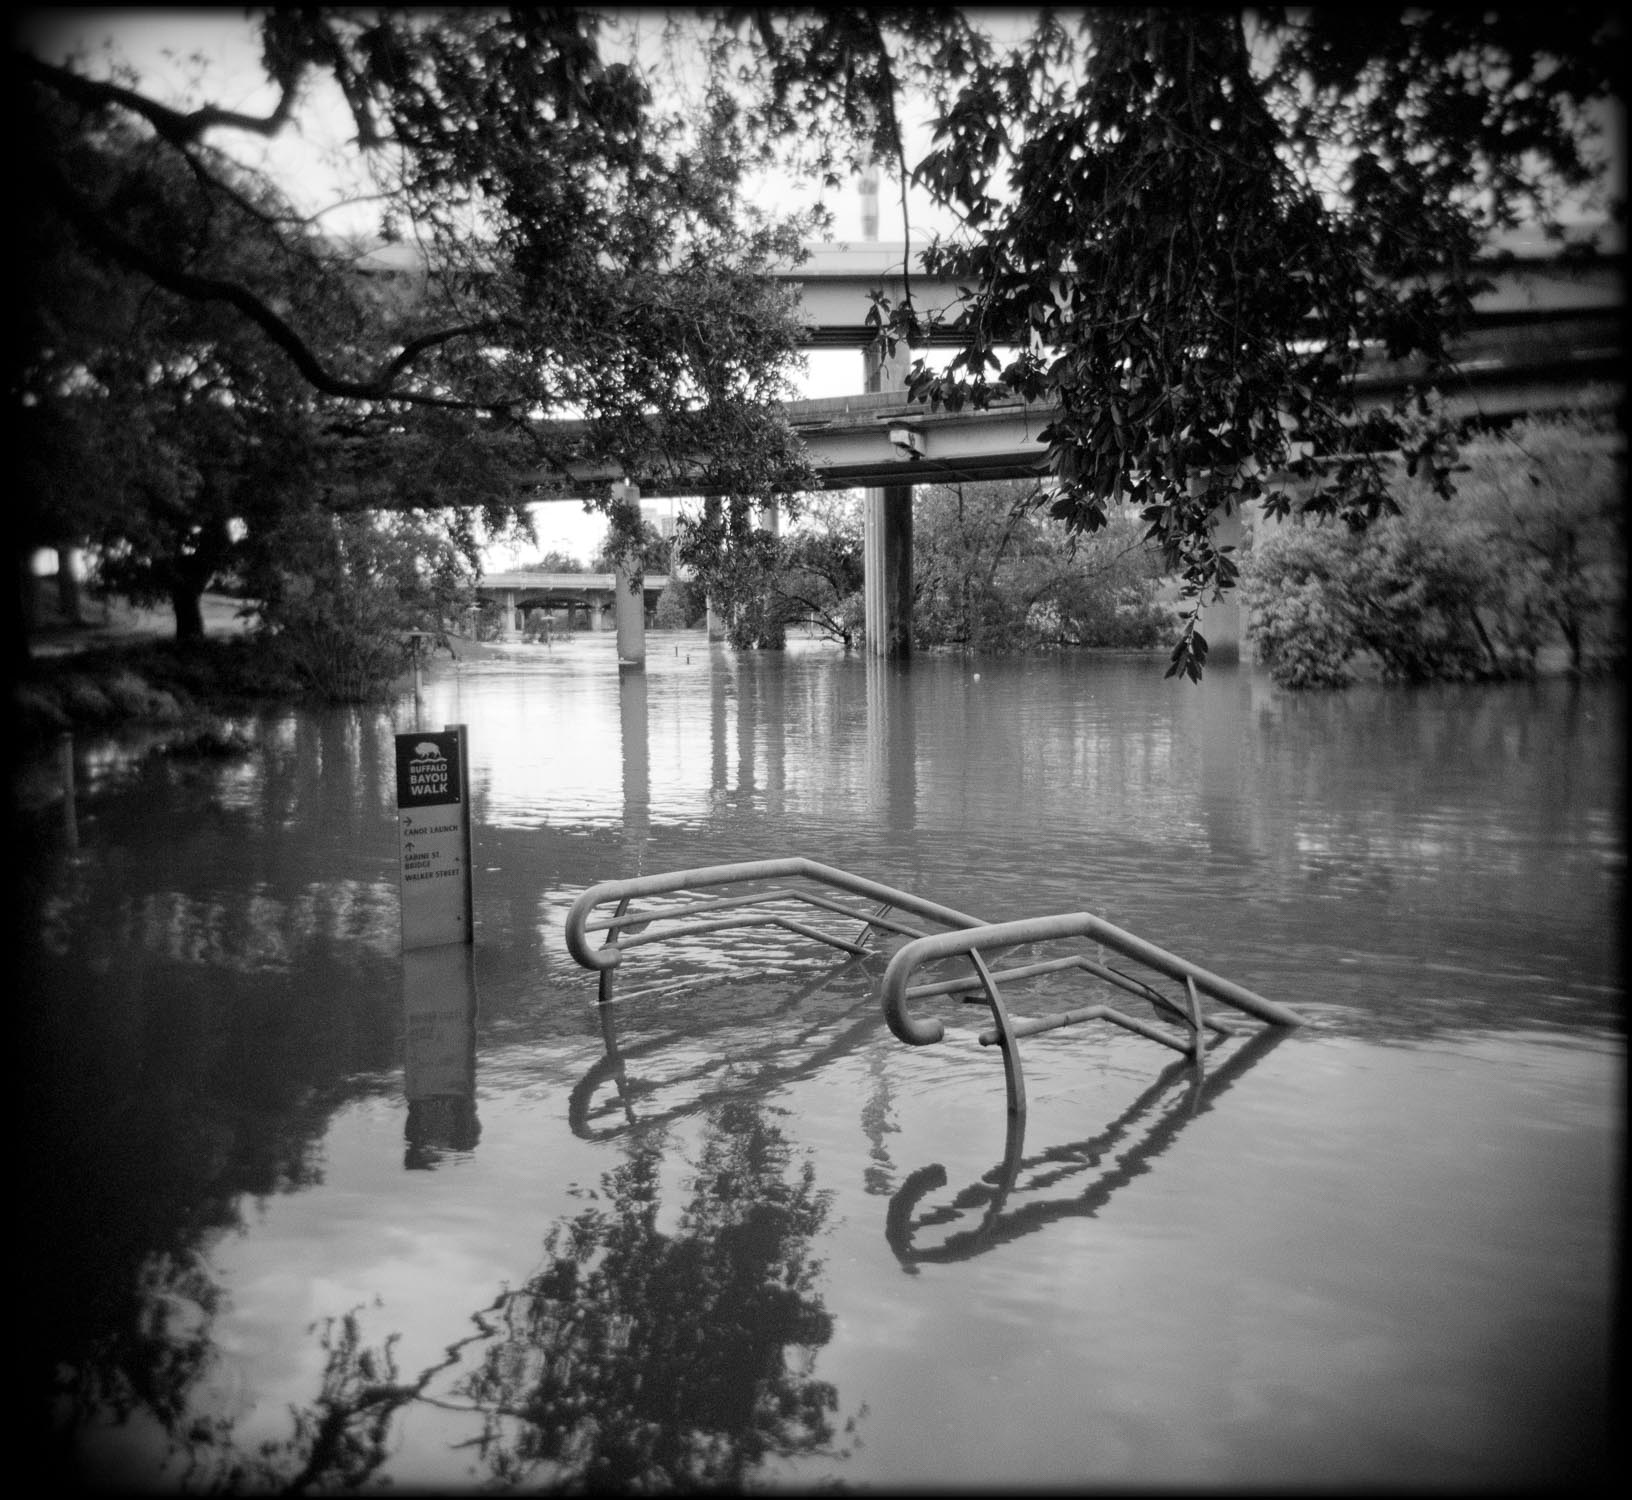   After Hurricane Ike, Houston, TX #1   "Eyes on a Changing Texas" &nbsp;| &nbsp;ASMP Texas Group Juried Exhibition FotoFest 2016 